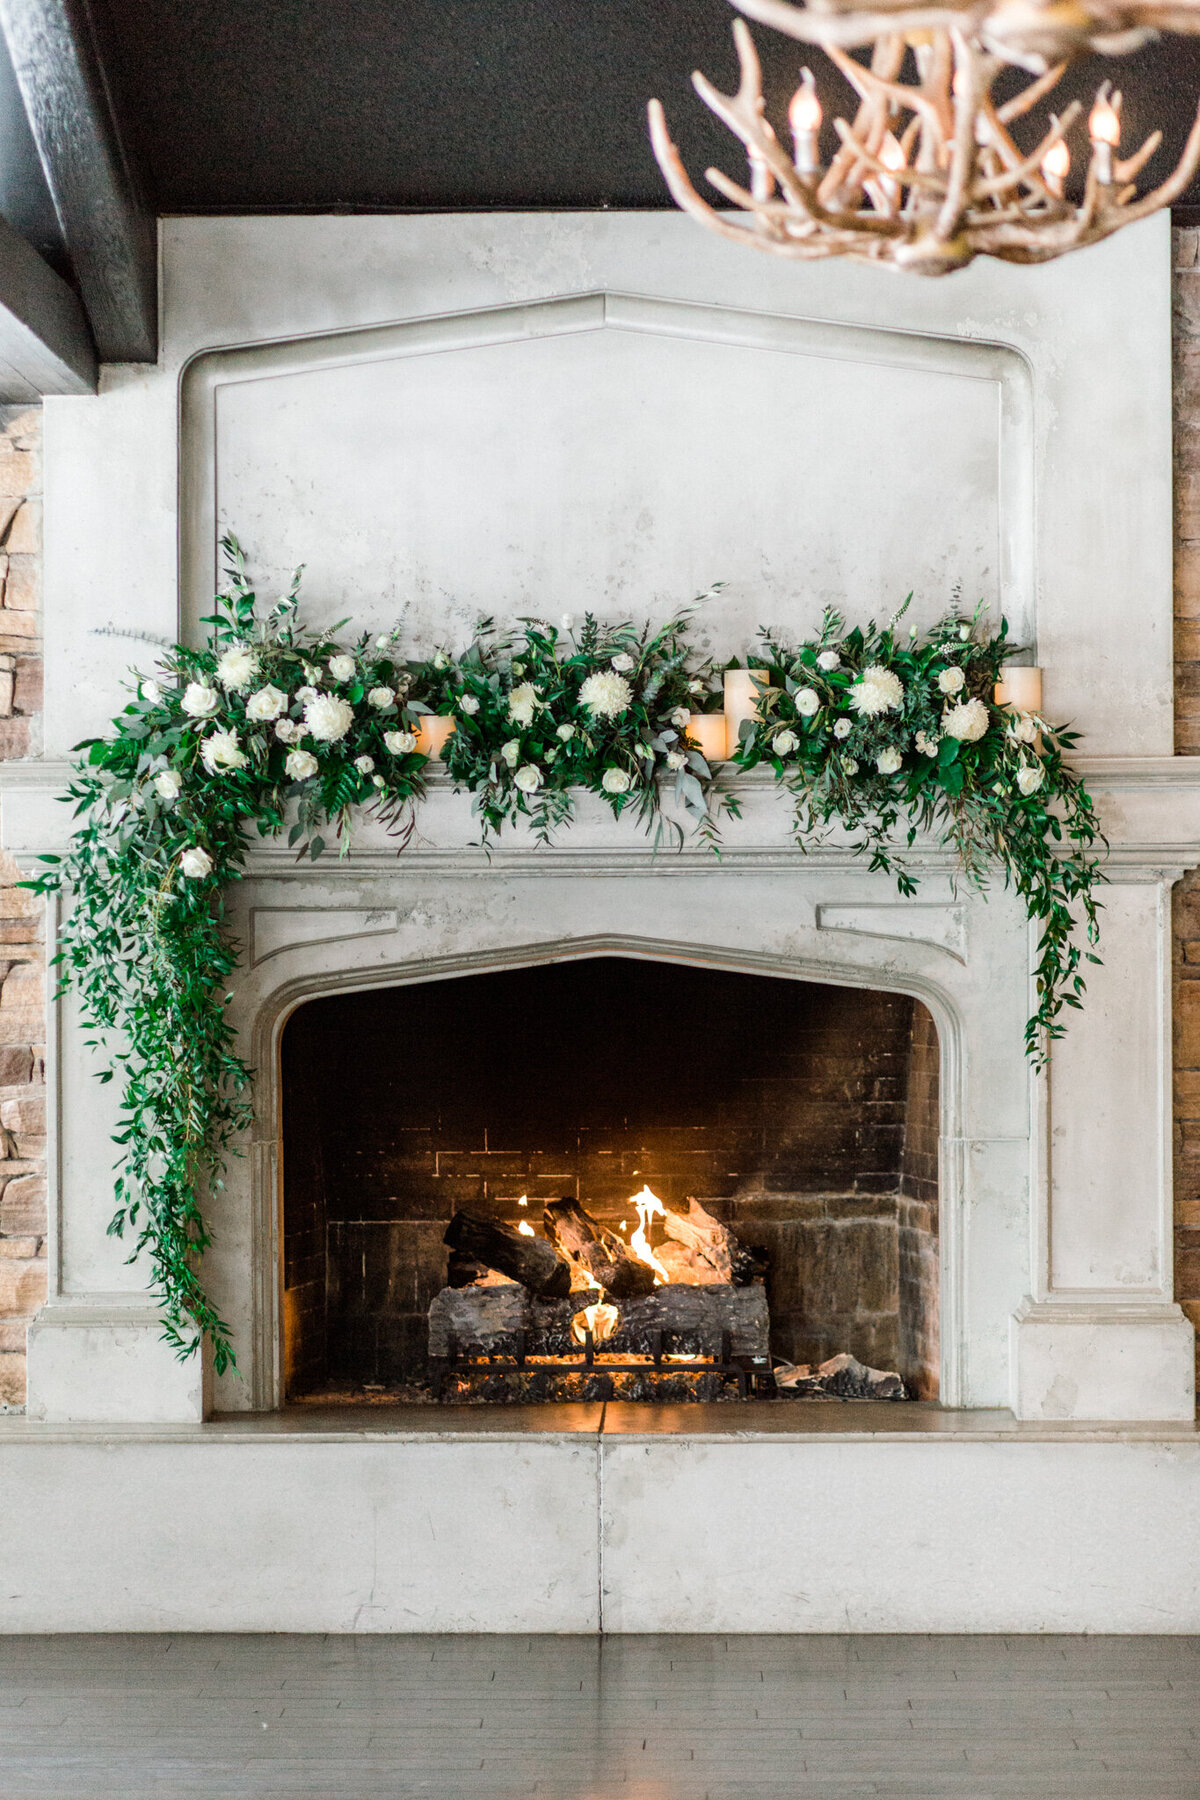 Stunning fireplace mantel with peach and white florals and cascading greenery by Flowers By Janie, artful Calgary, Alberta wedding florist, featured on the Brontë Bride Vendor Guide.